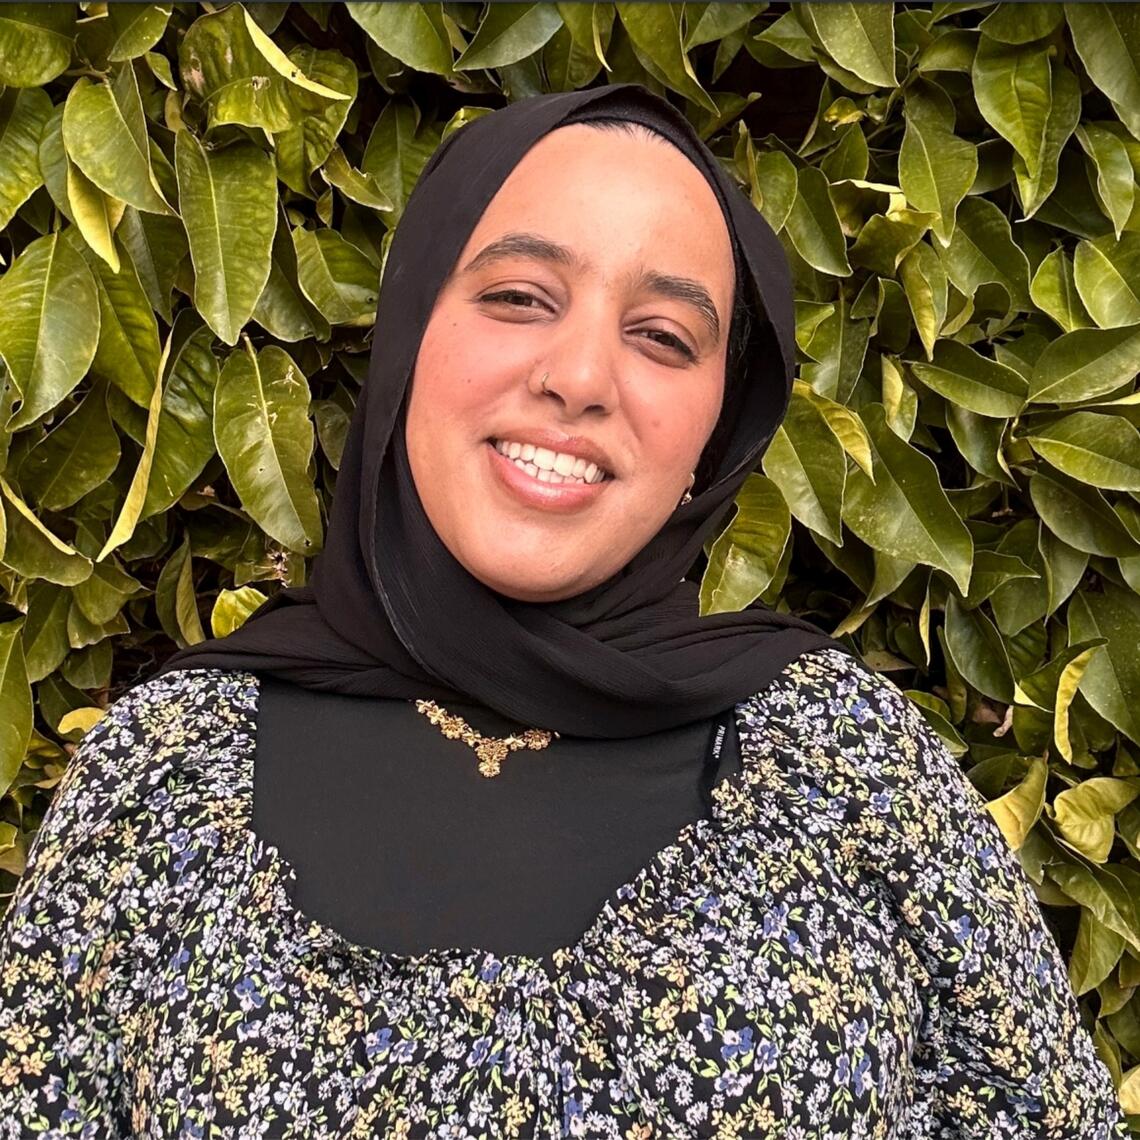 A woman in a black hijab and a white and black top smiles at the camera in front of green leaves